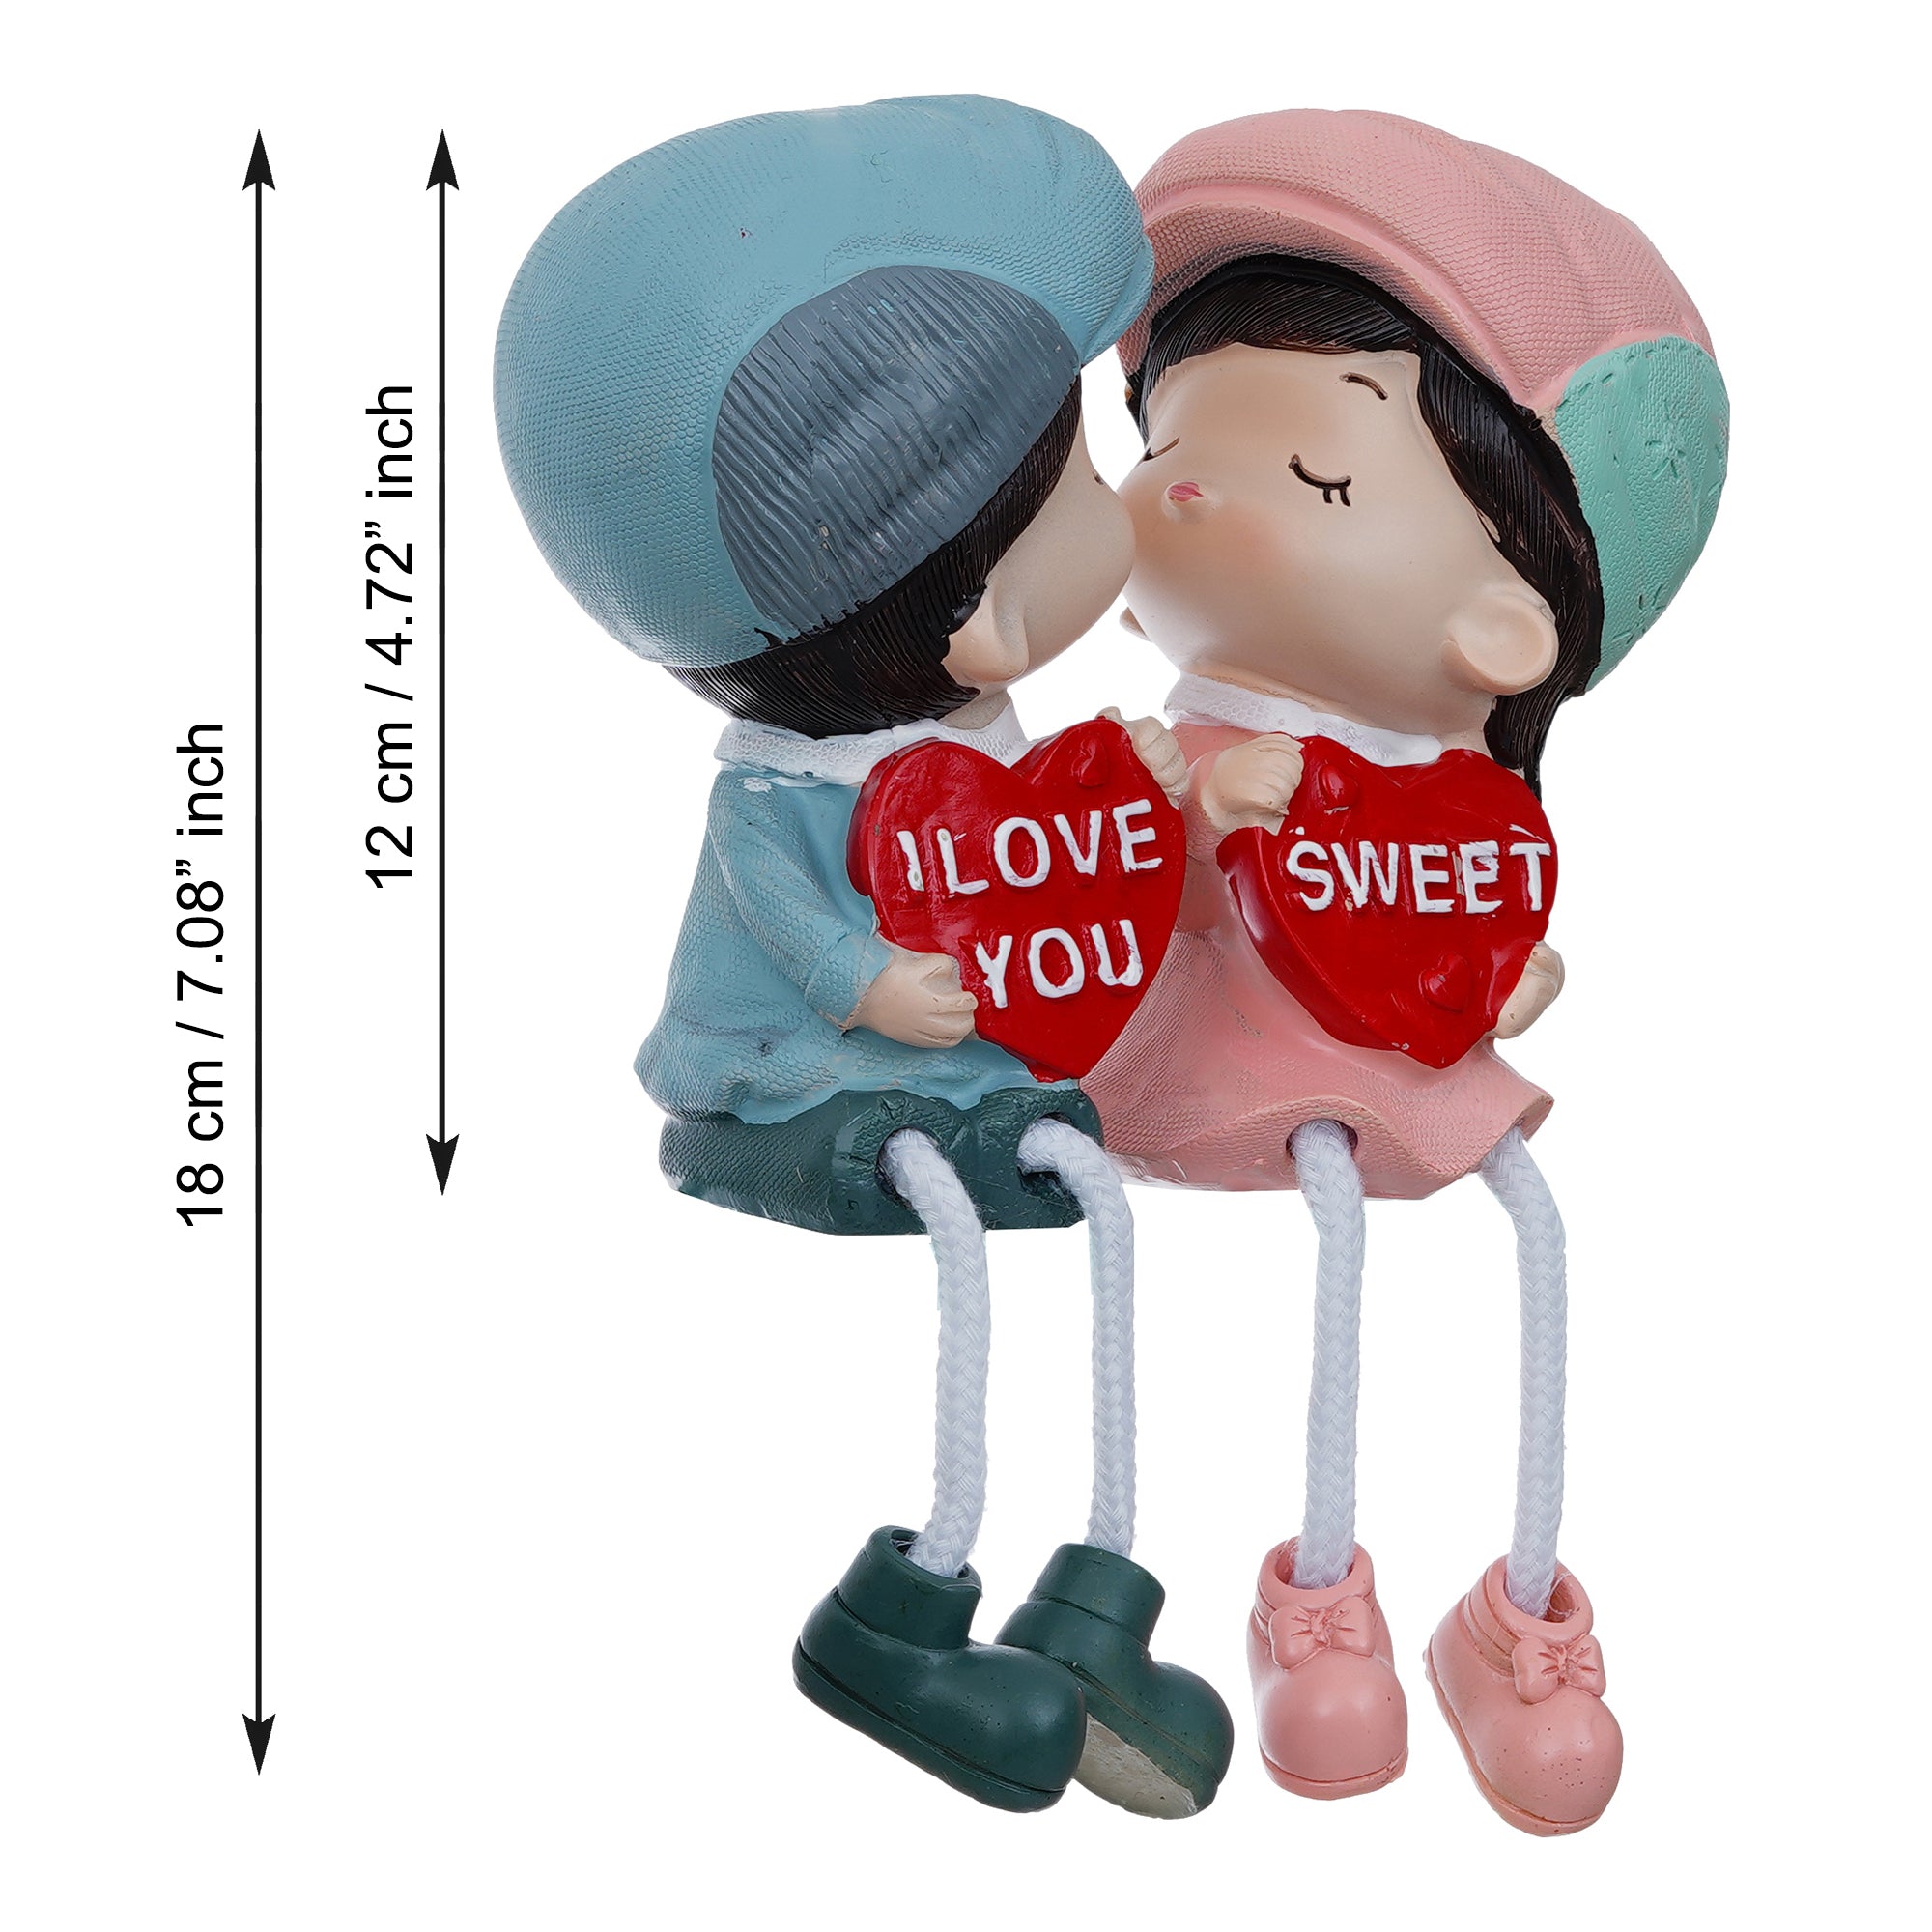 Colorful Girl & Boy Kissing Couple Statue 5